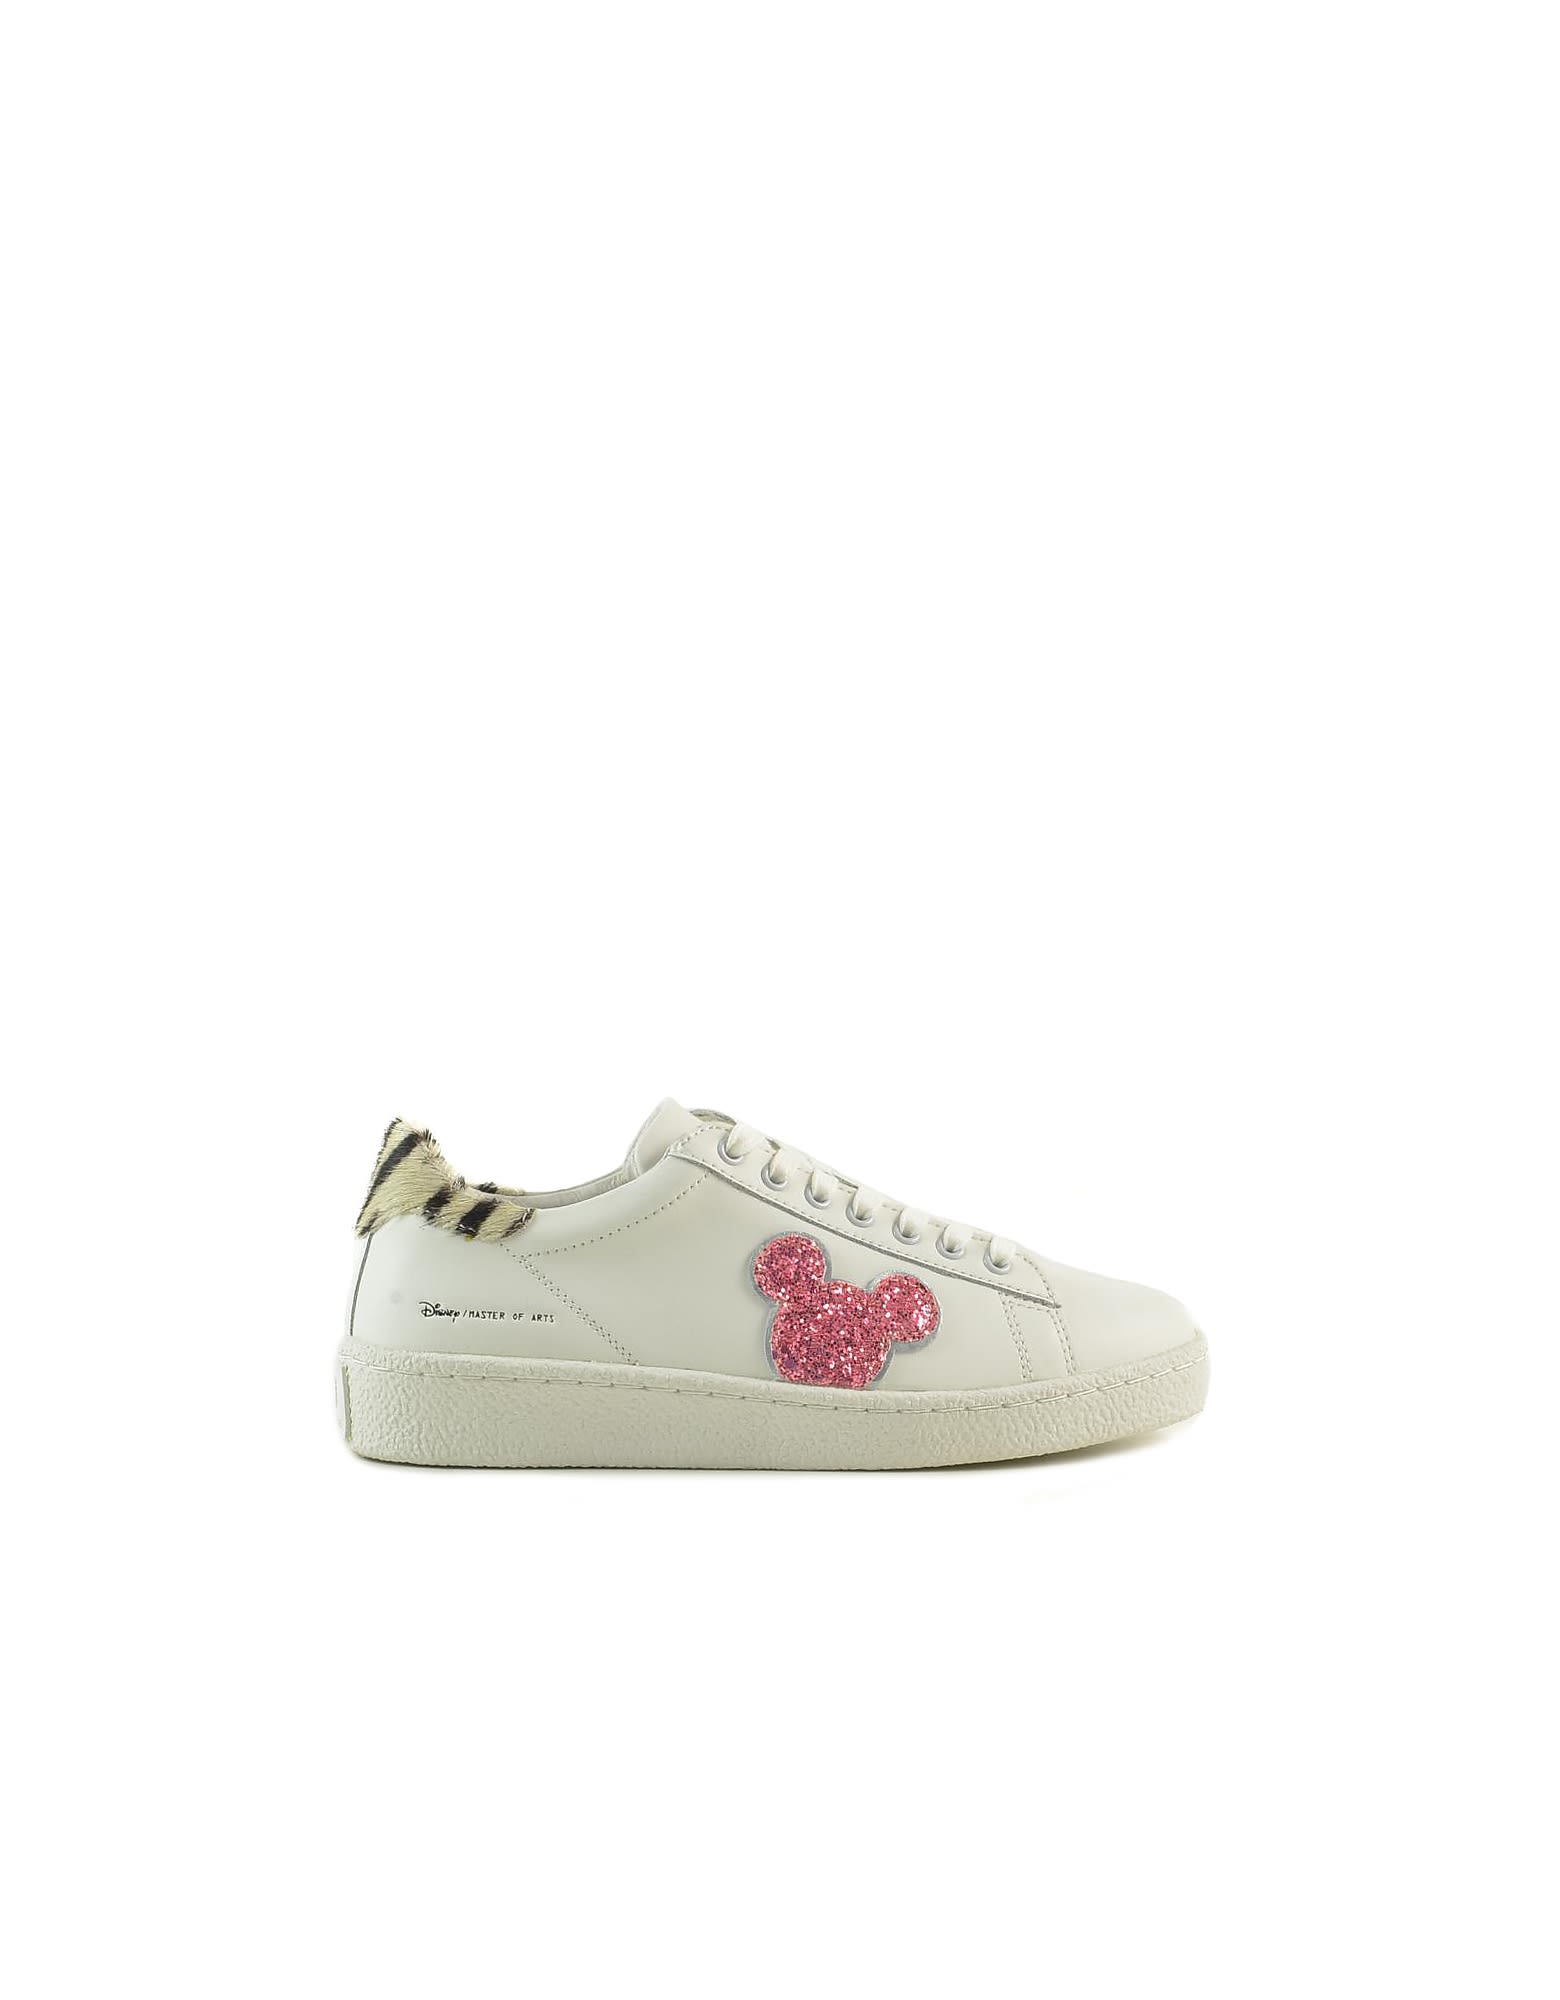 M.O.A. master of arts Moa Master Of Arts White Leather And Glitter Womens Sneakers